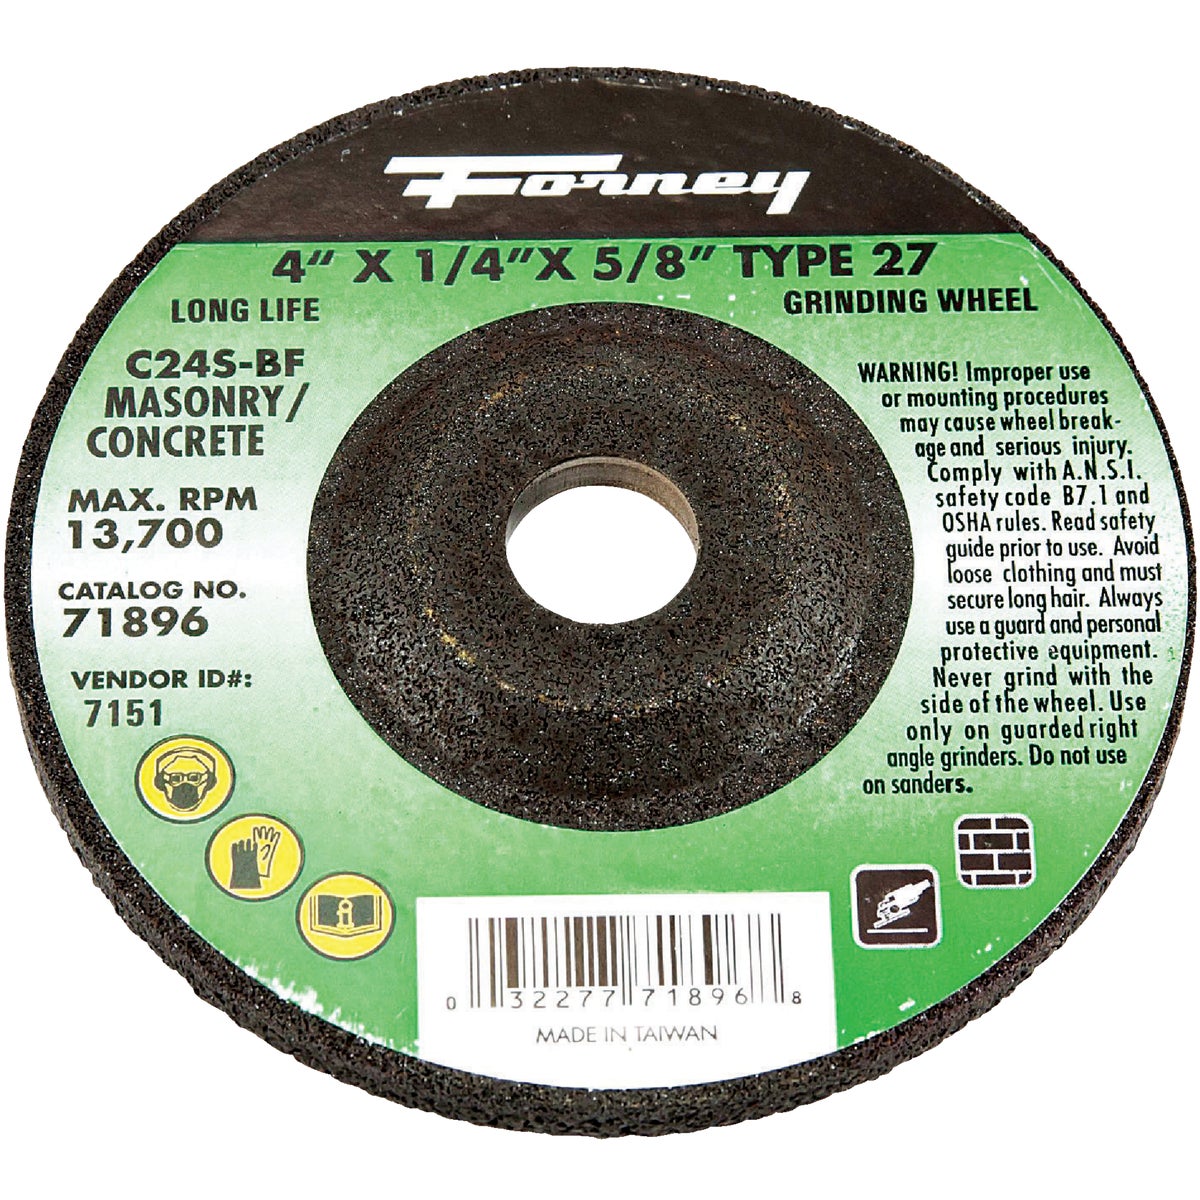 Item 301855, Type 27, depressed center grinding wheel is designed for cutting, grinding